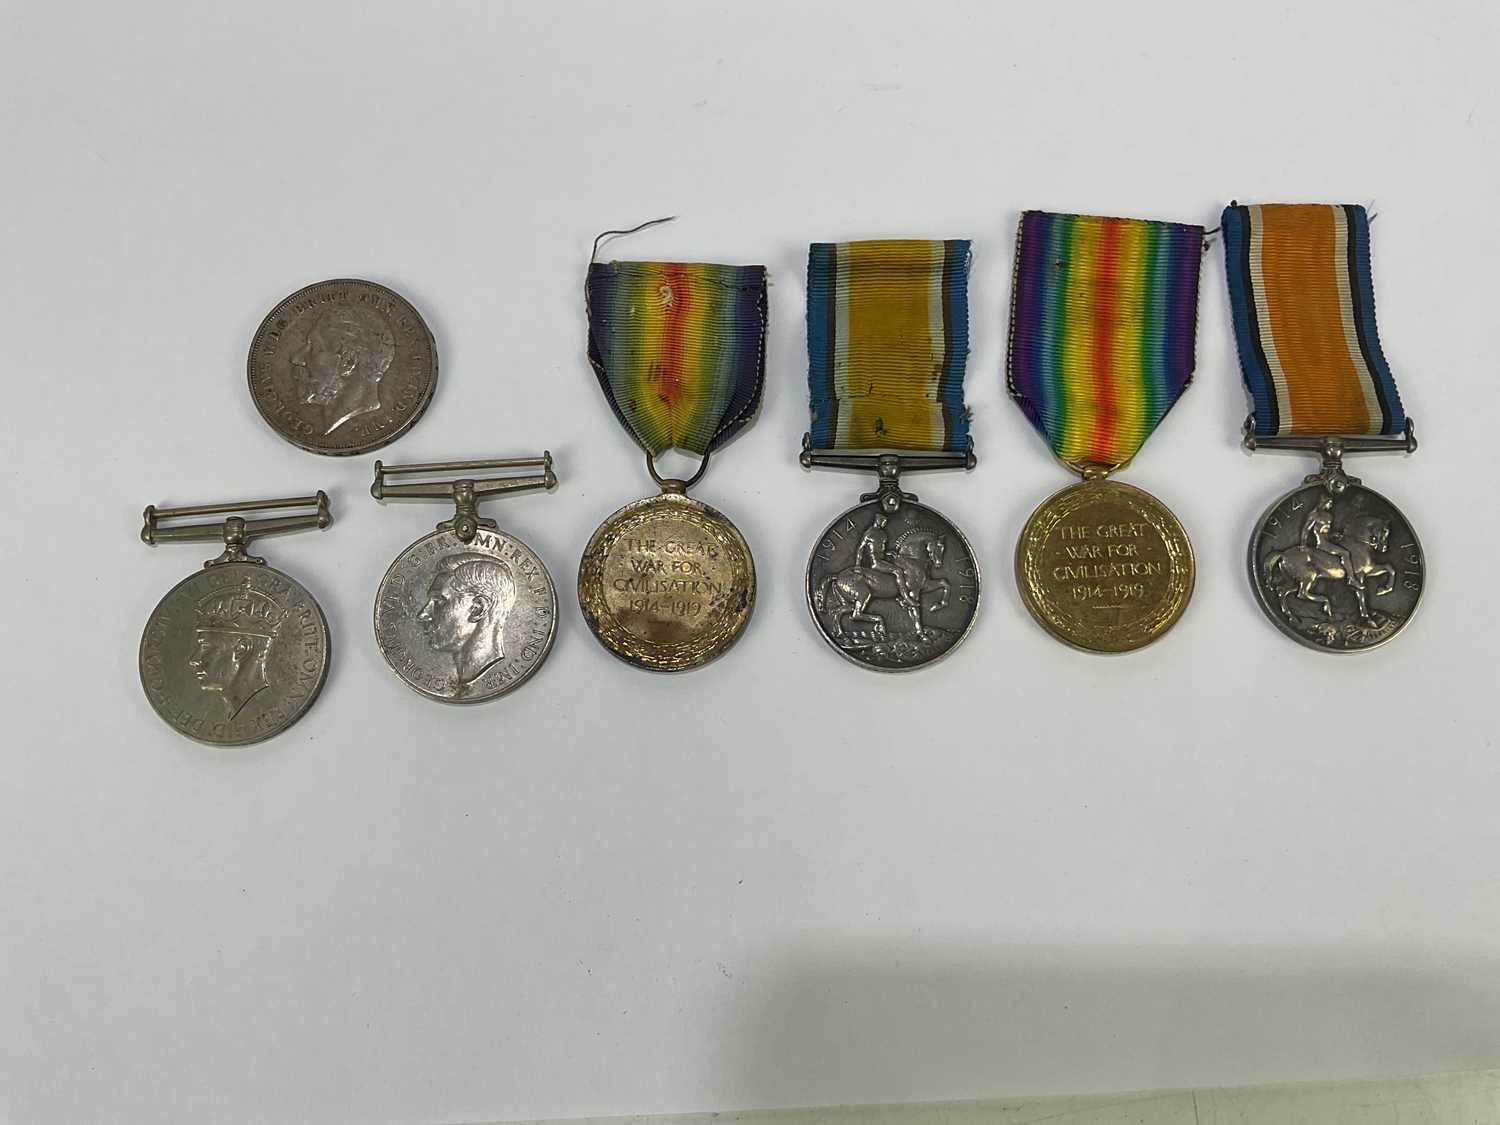 A WWI medal pair awarded to 6068 Pte J.J. Wills, 6 Lond.R., with a further WWI medal pair awarded - Bild 2 aus 2